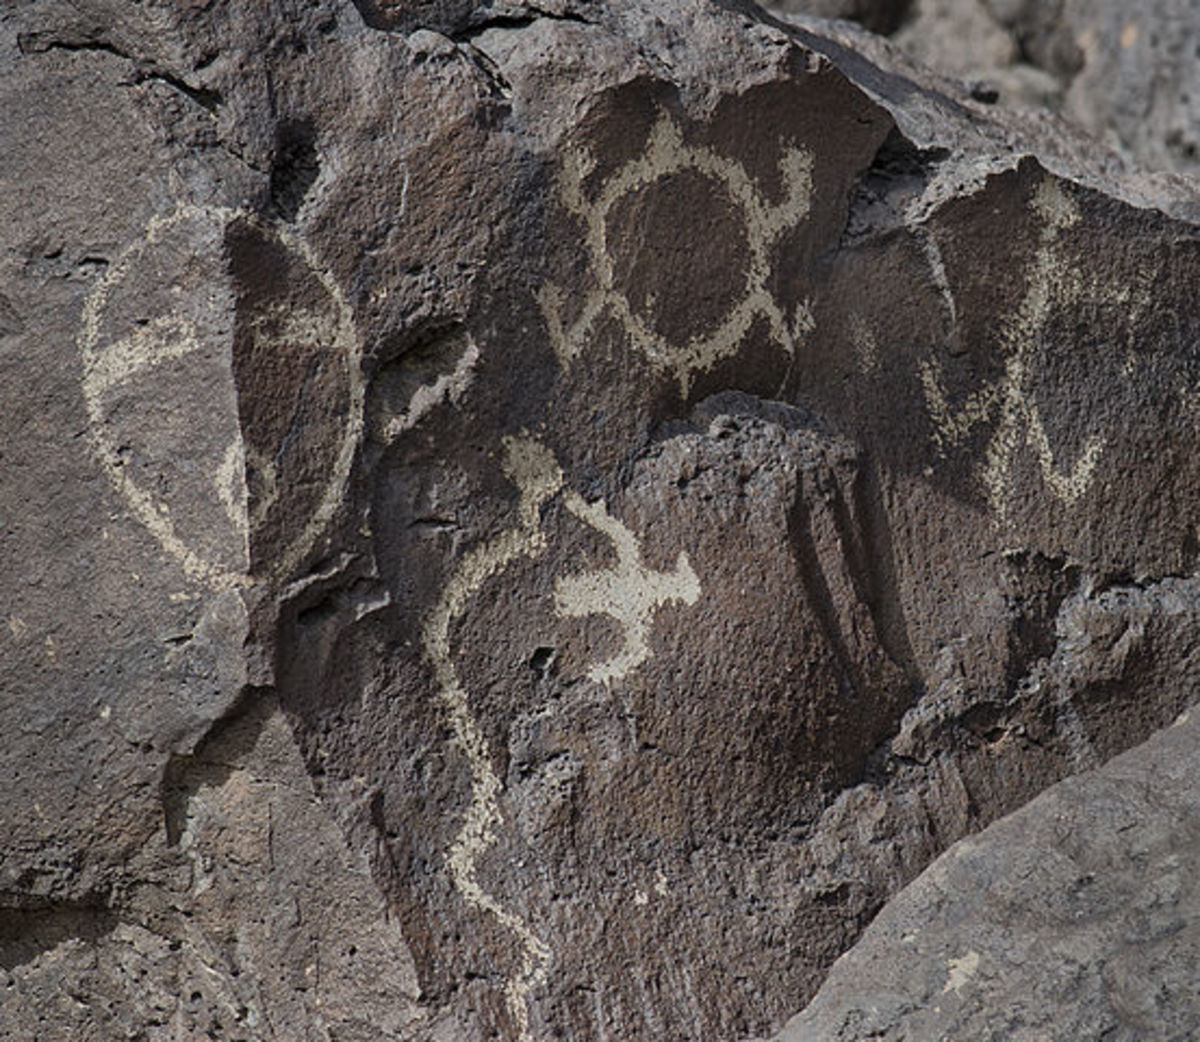 Photo taken at Petroglyph National Monument, on the west side of Albuquerque, New Mexico